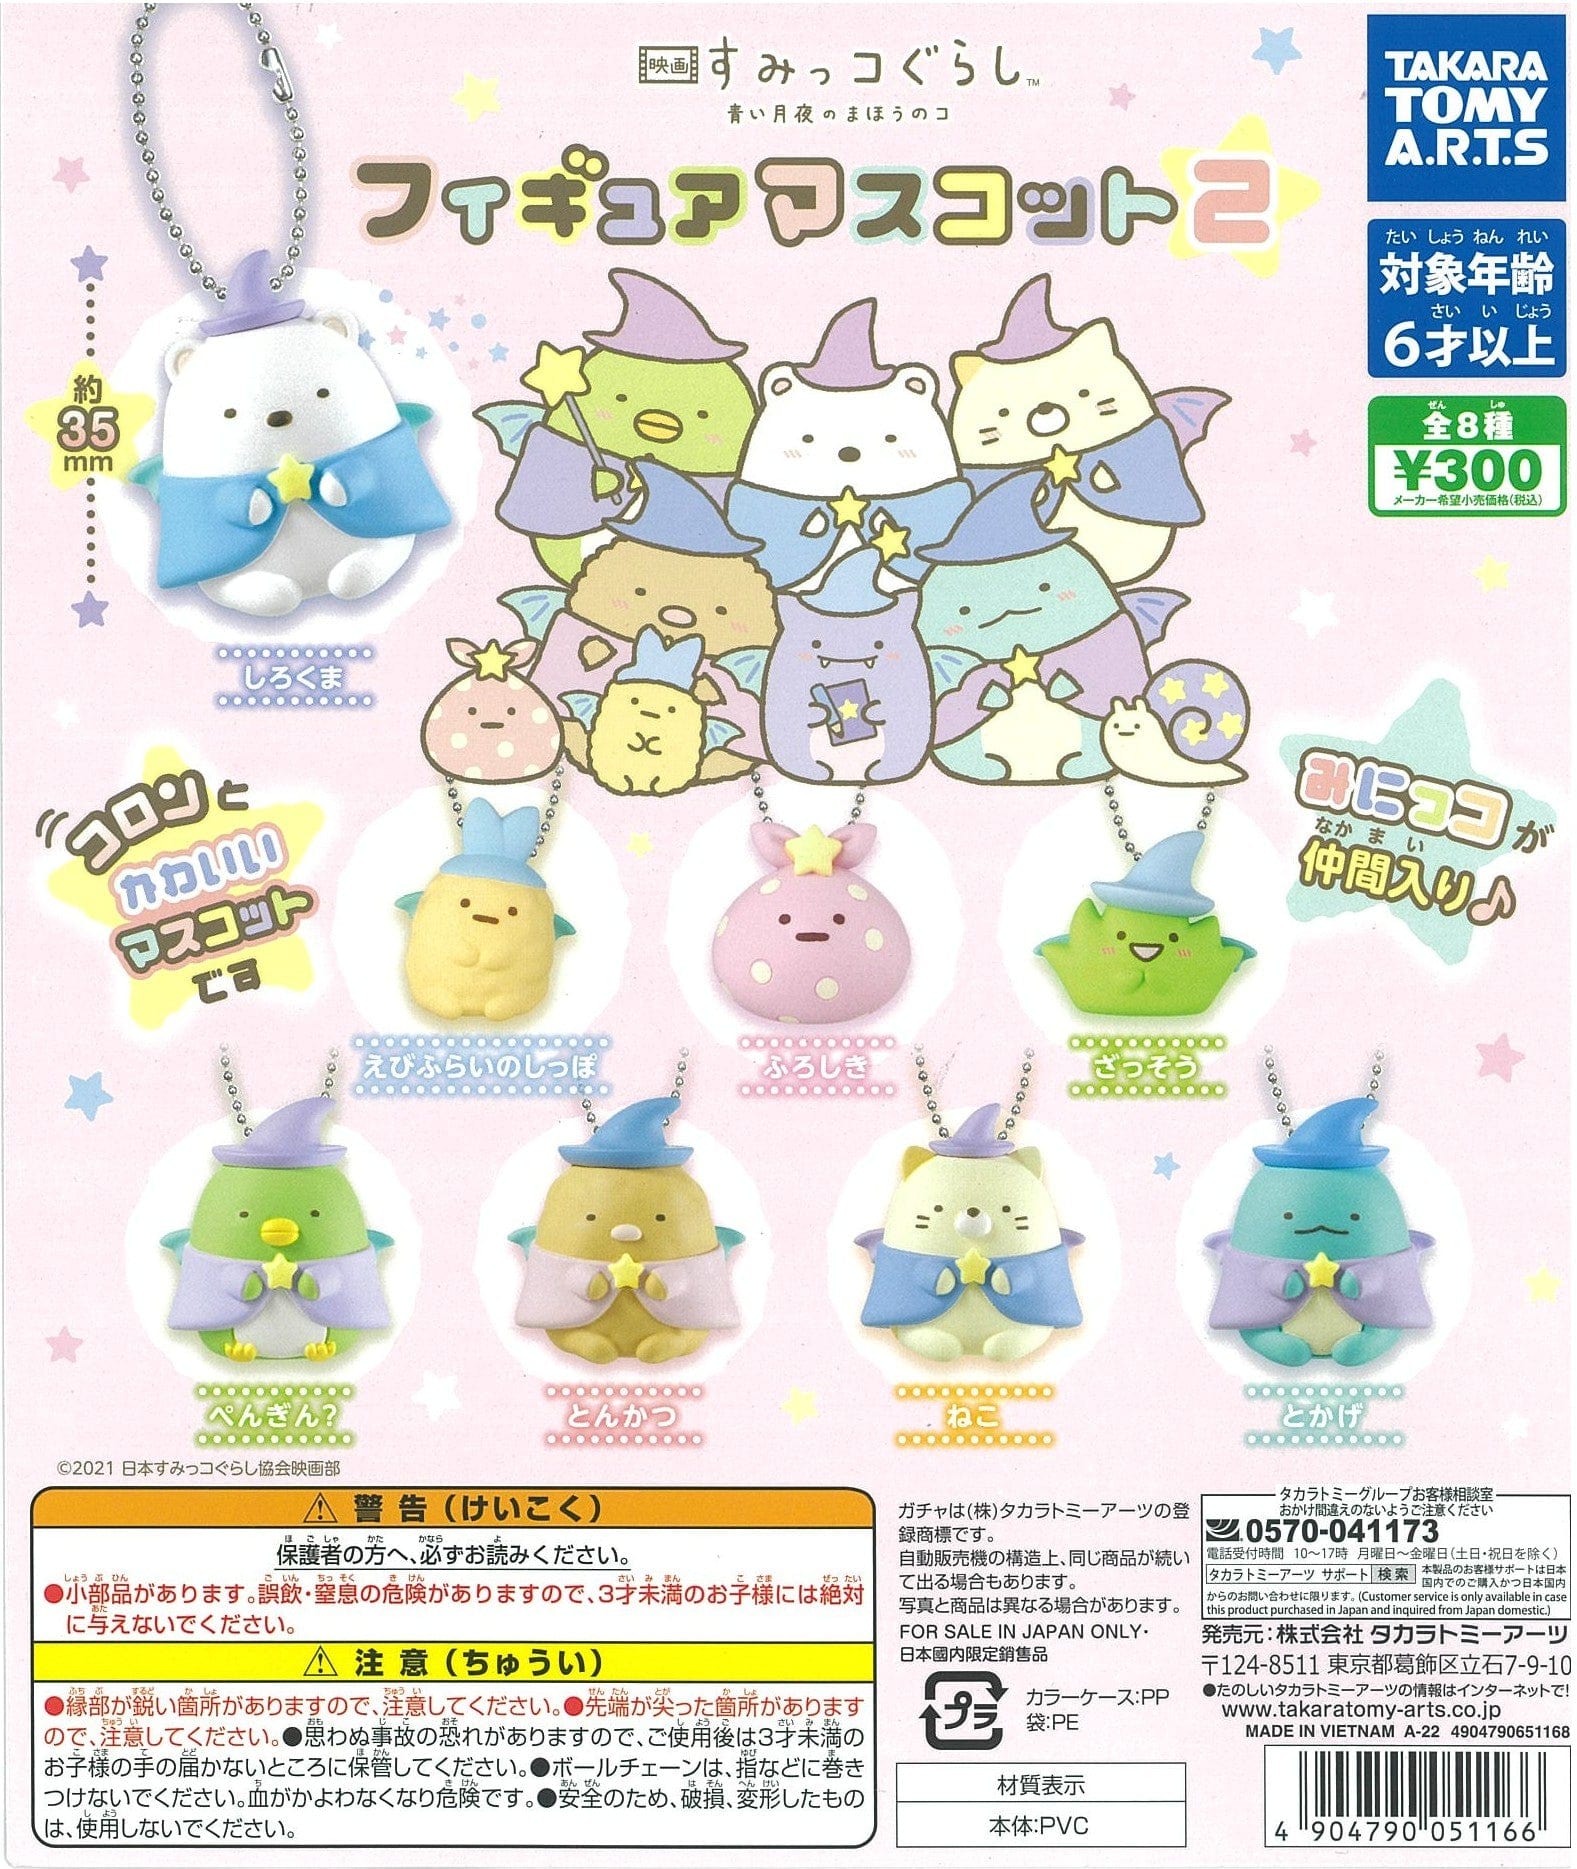 Takara Tomy A.R.T.S CP1525 Sumikko Gurashi The Movie A Magical Child of the Blue Moonlit Night Figure Mascot 2